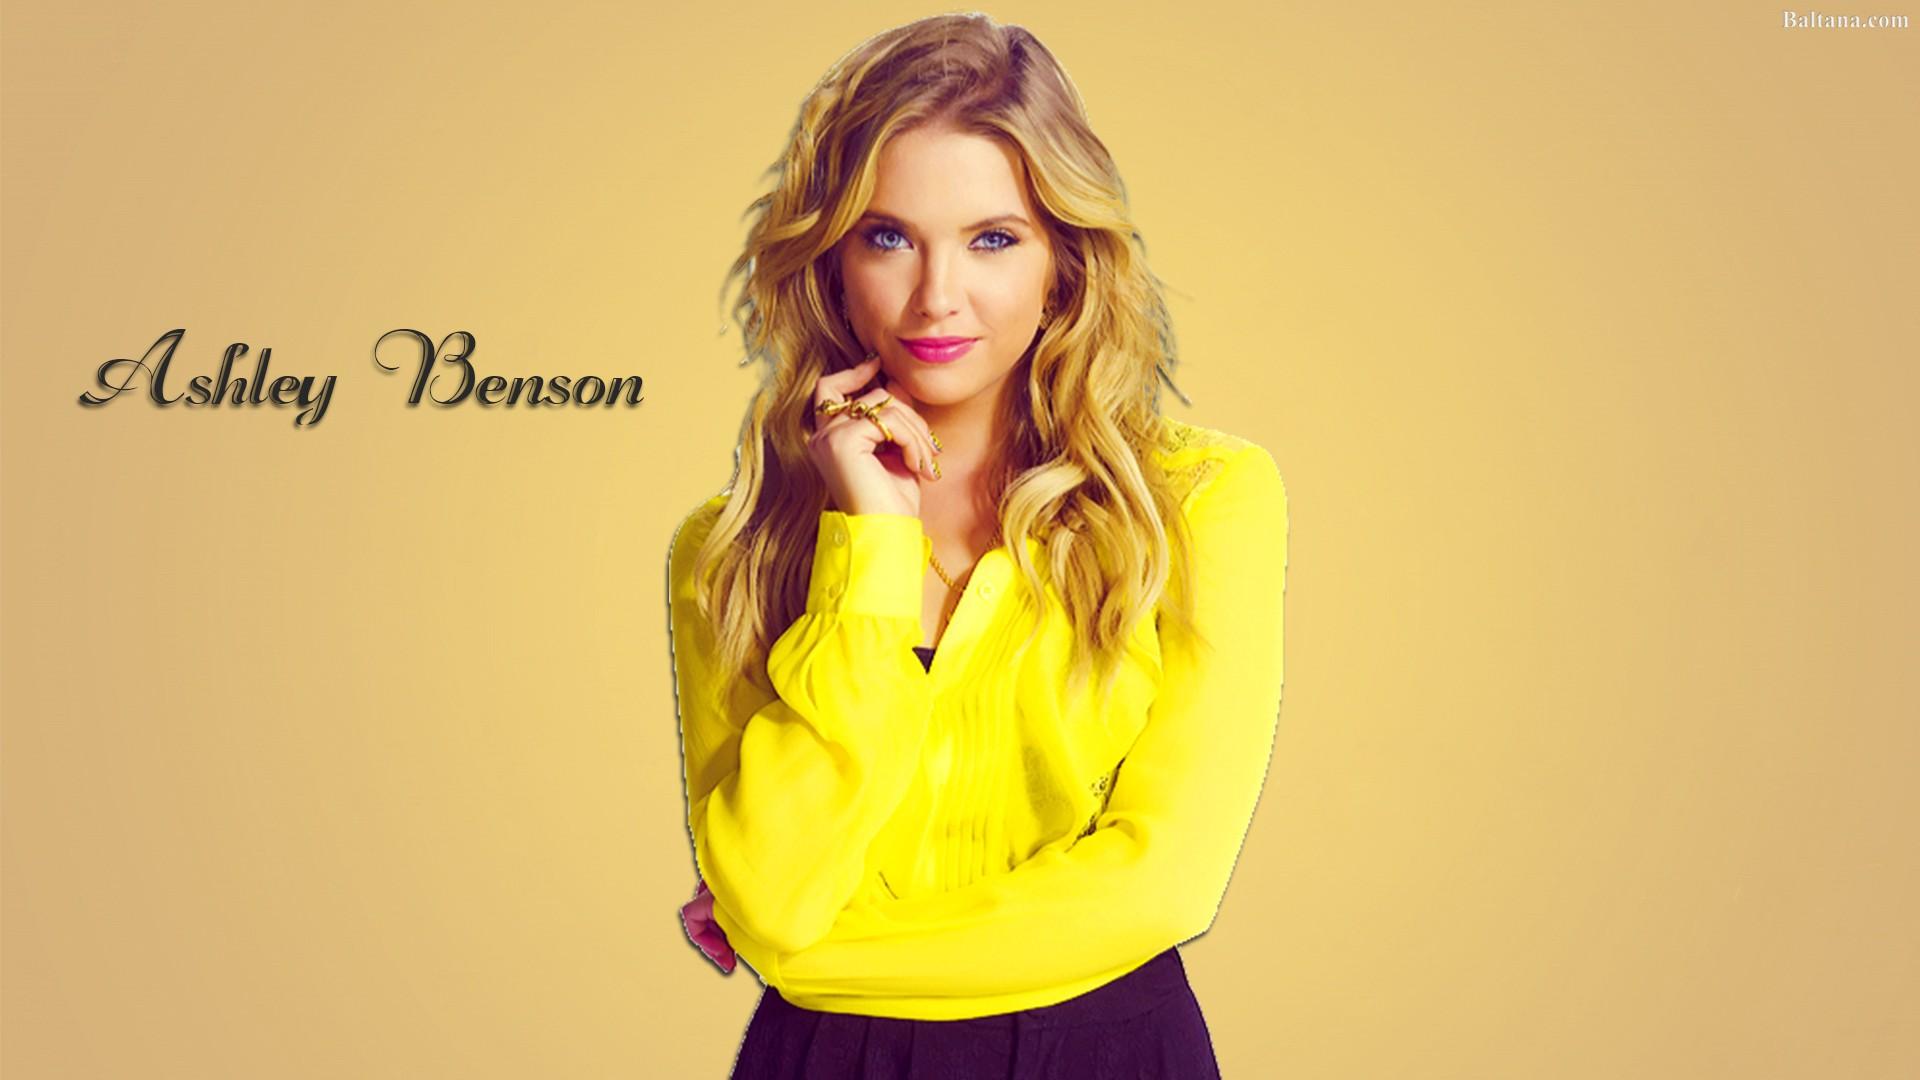 Ashley Benson Wallpaper (image in Collection)